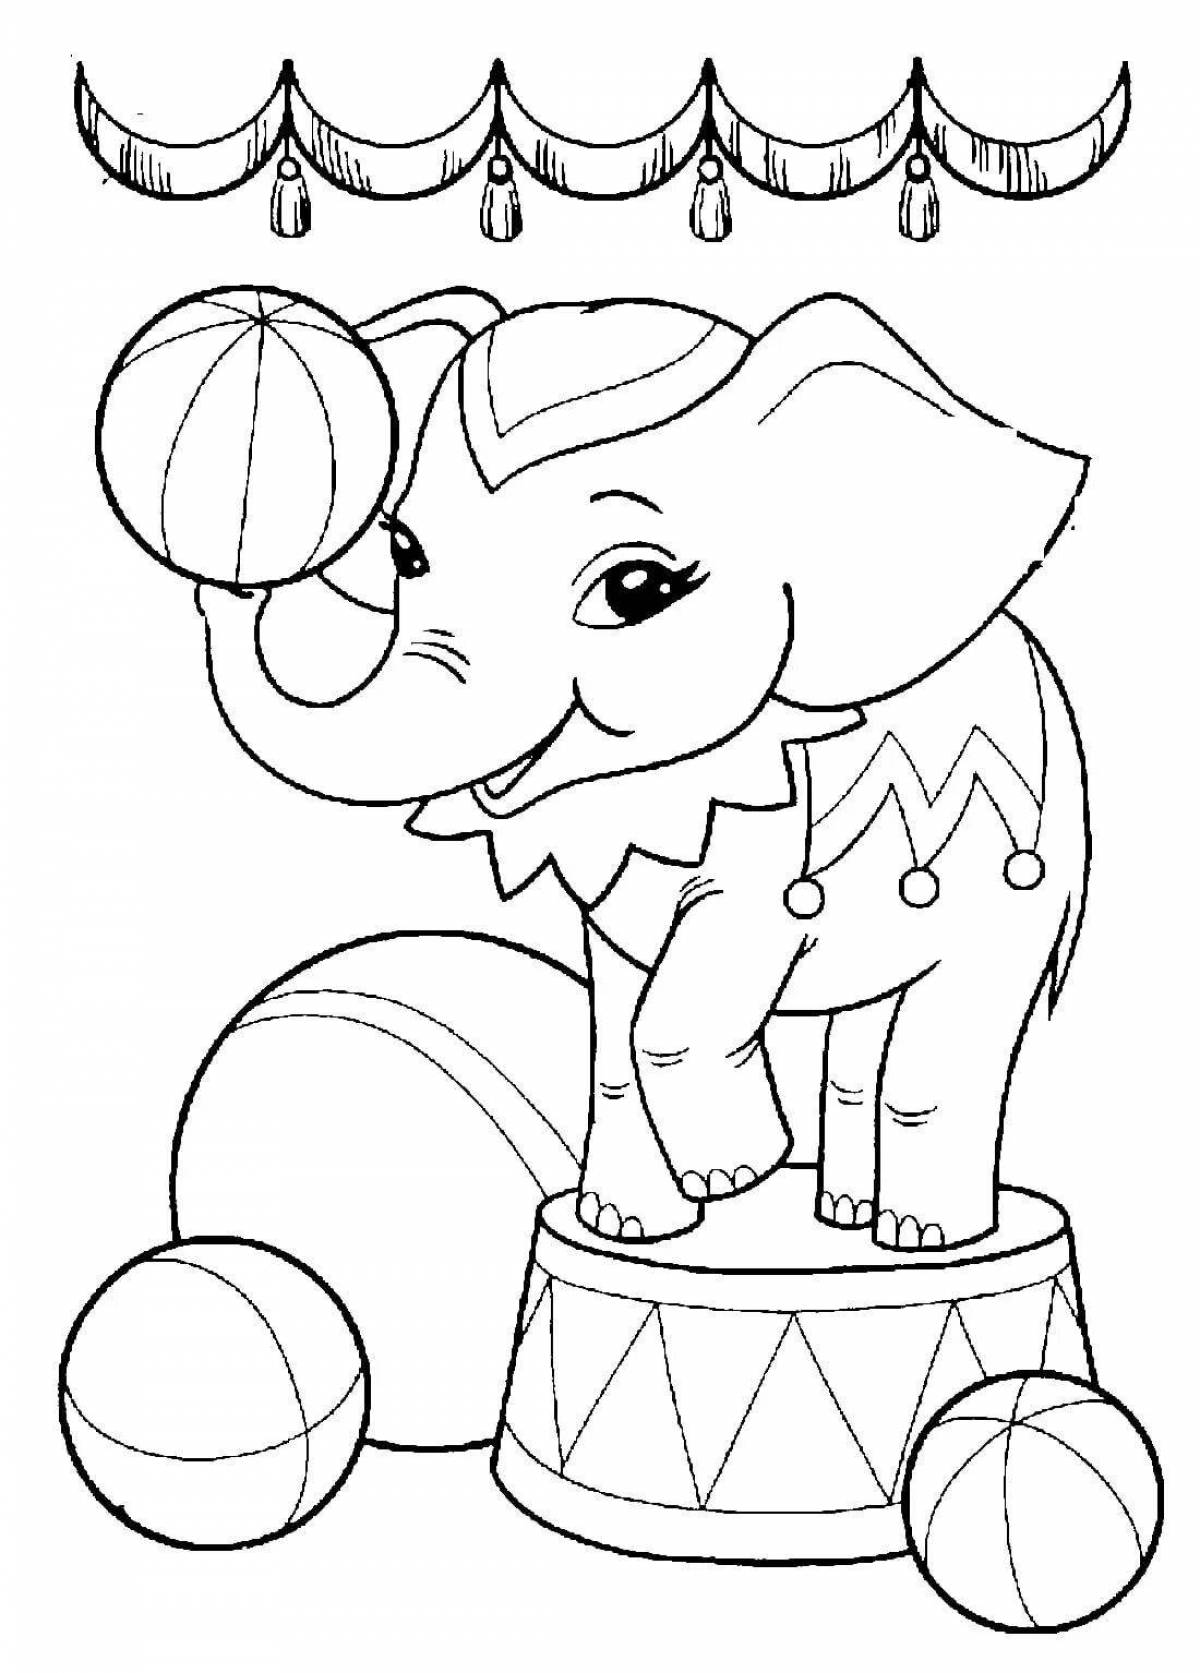 Coloring page friendly circus for kids